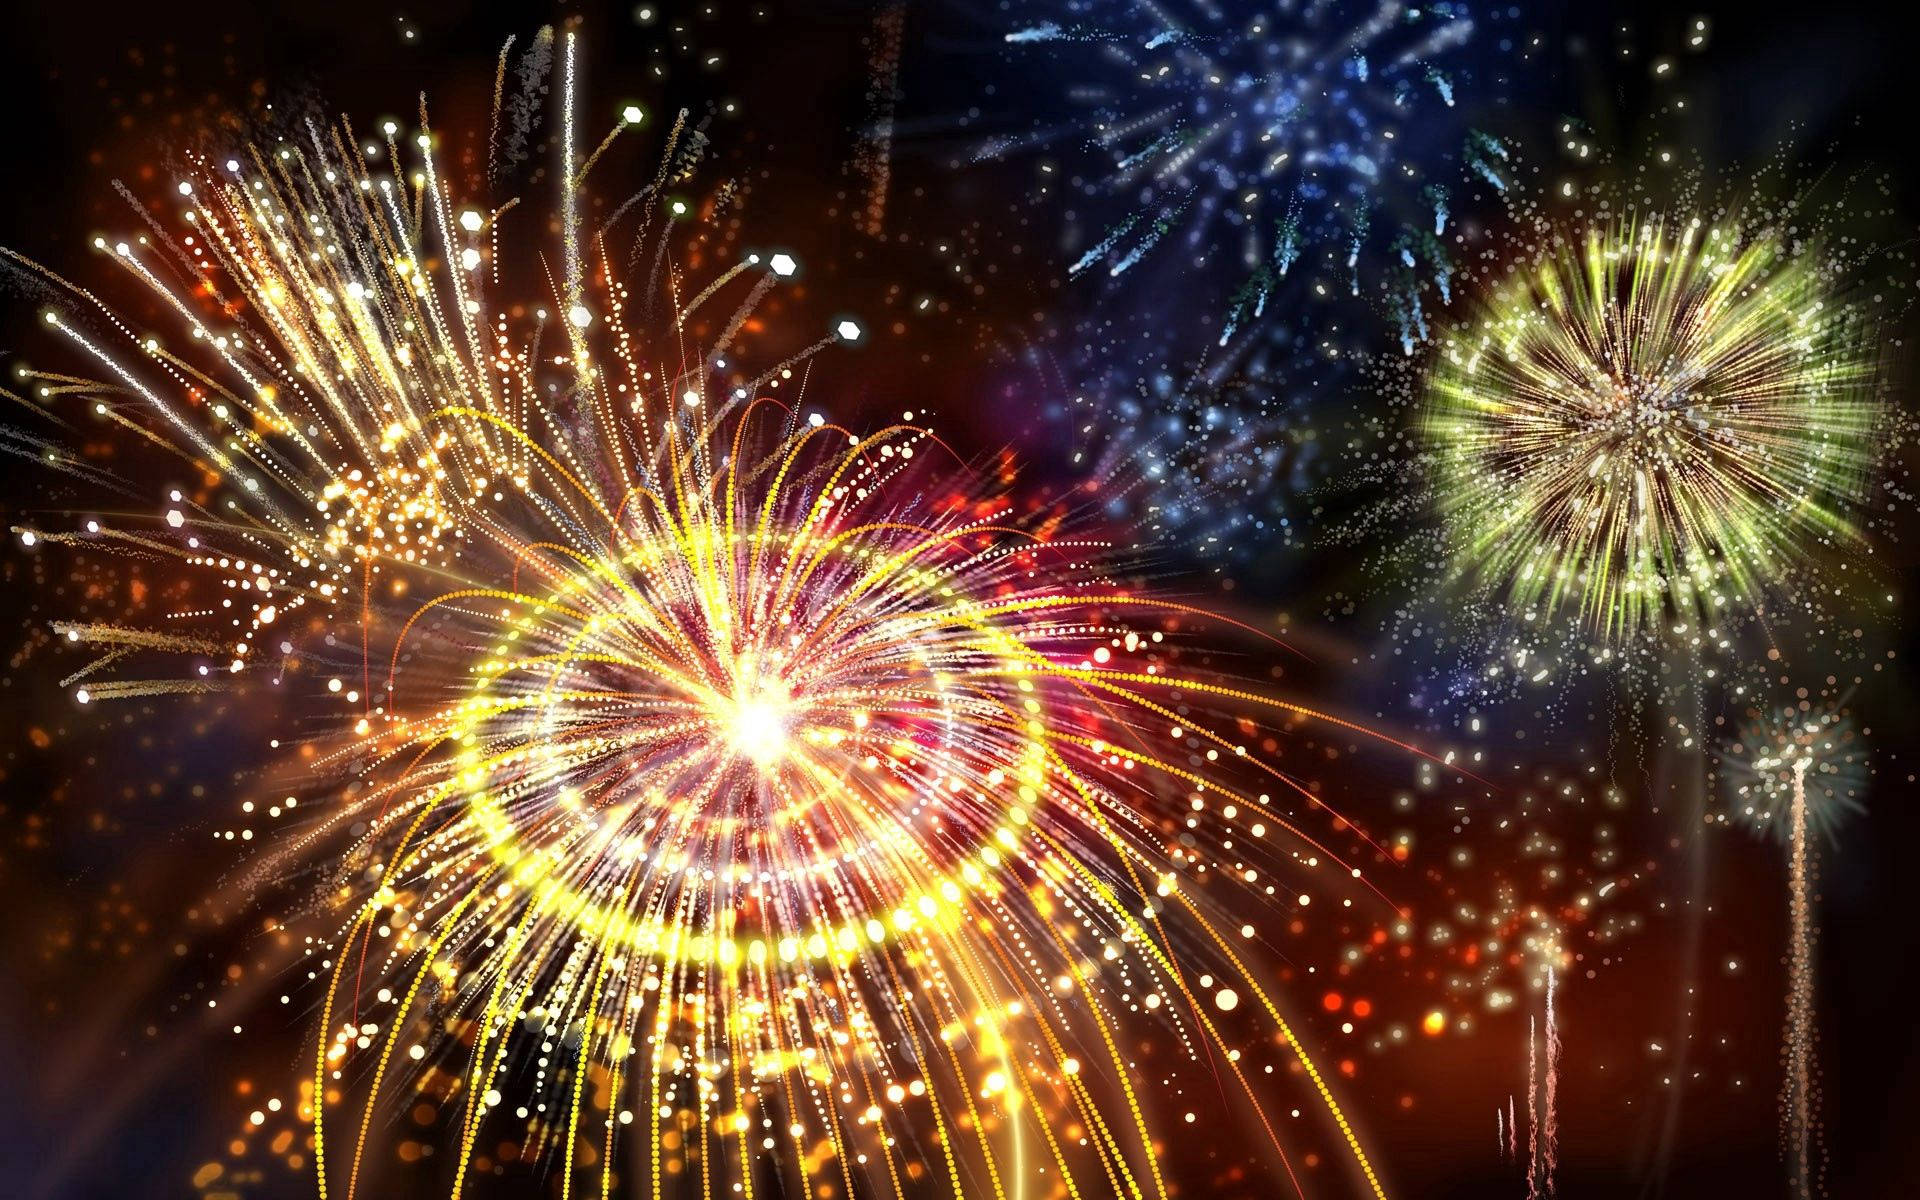 Explosion, Flash, Bright, Fireworks, Colorful Background